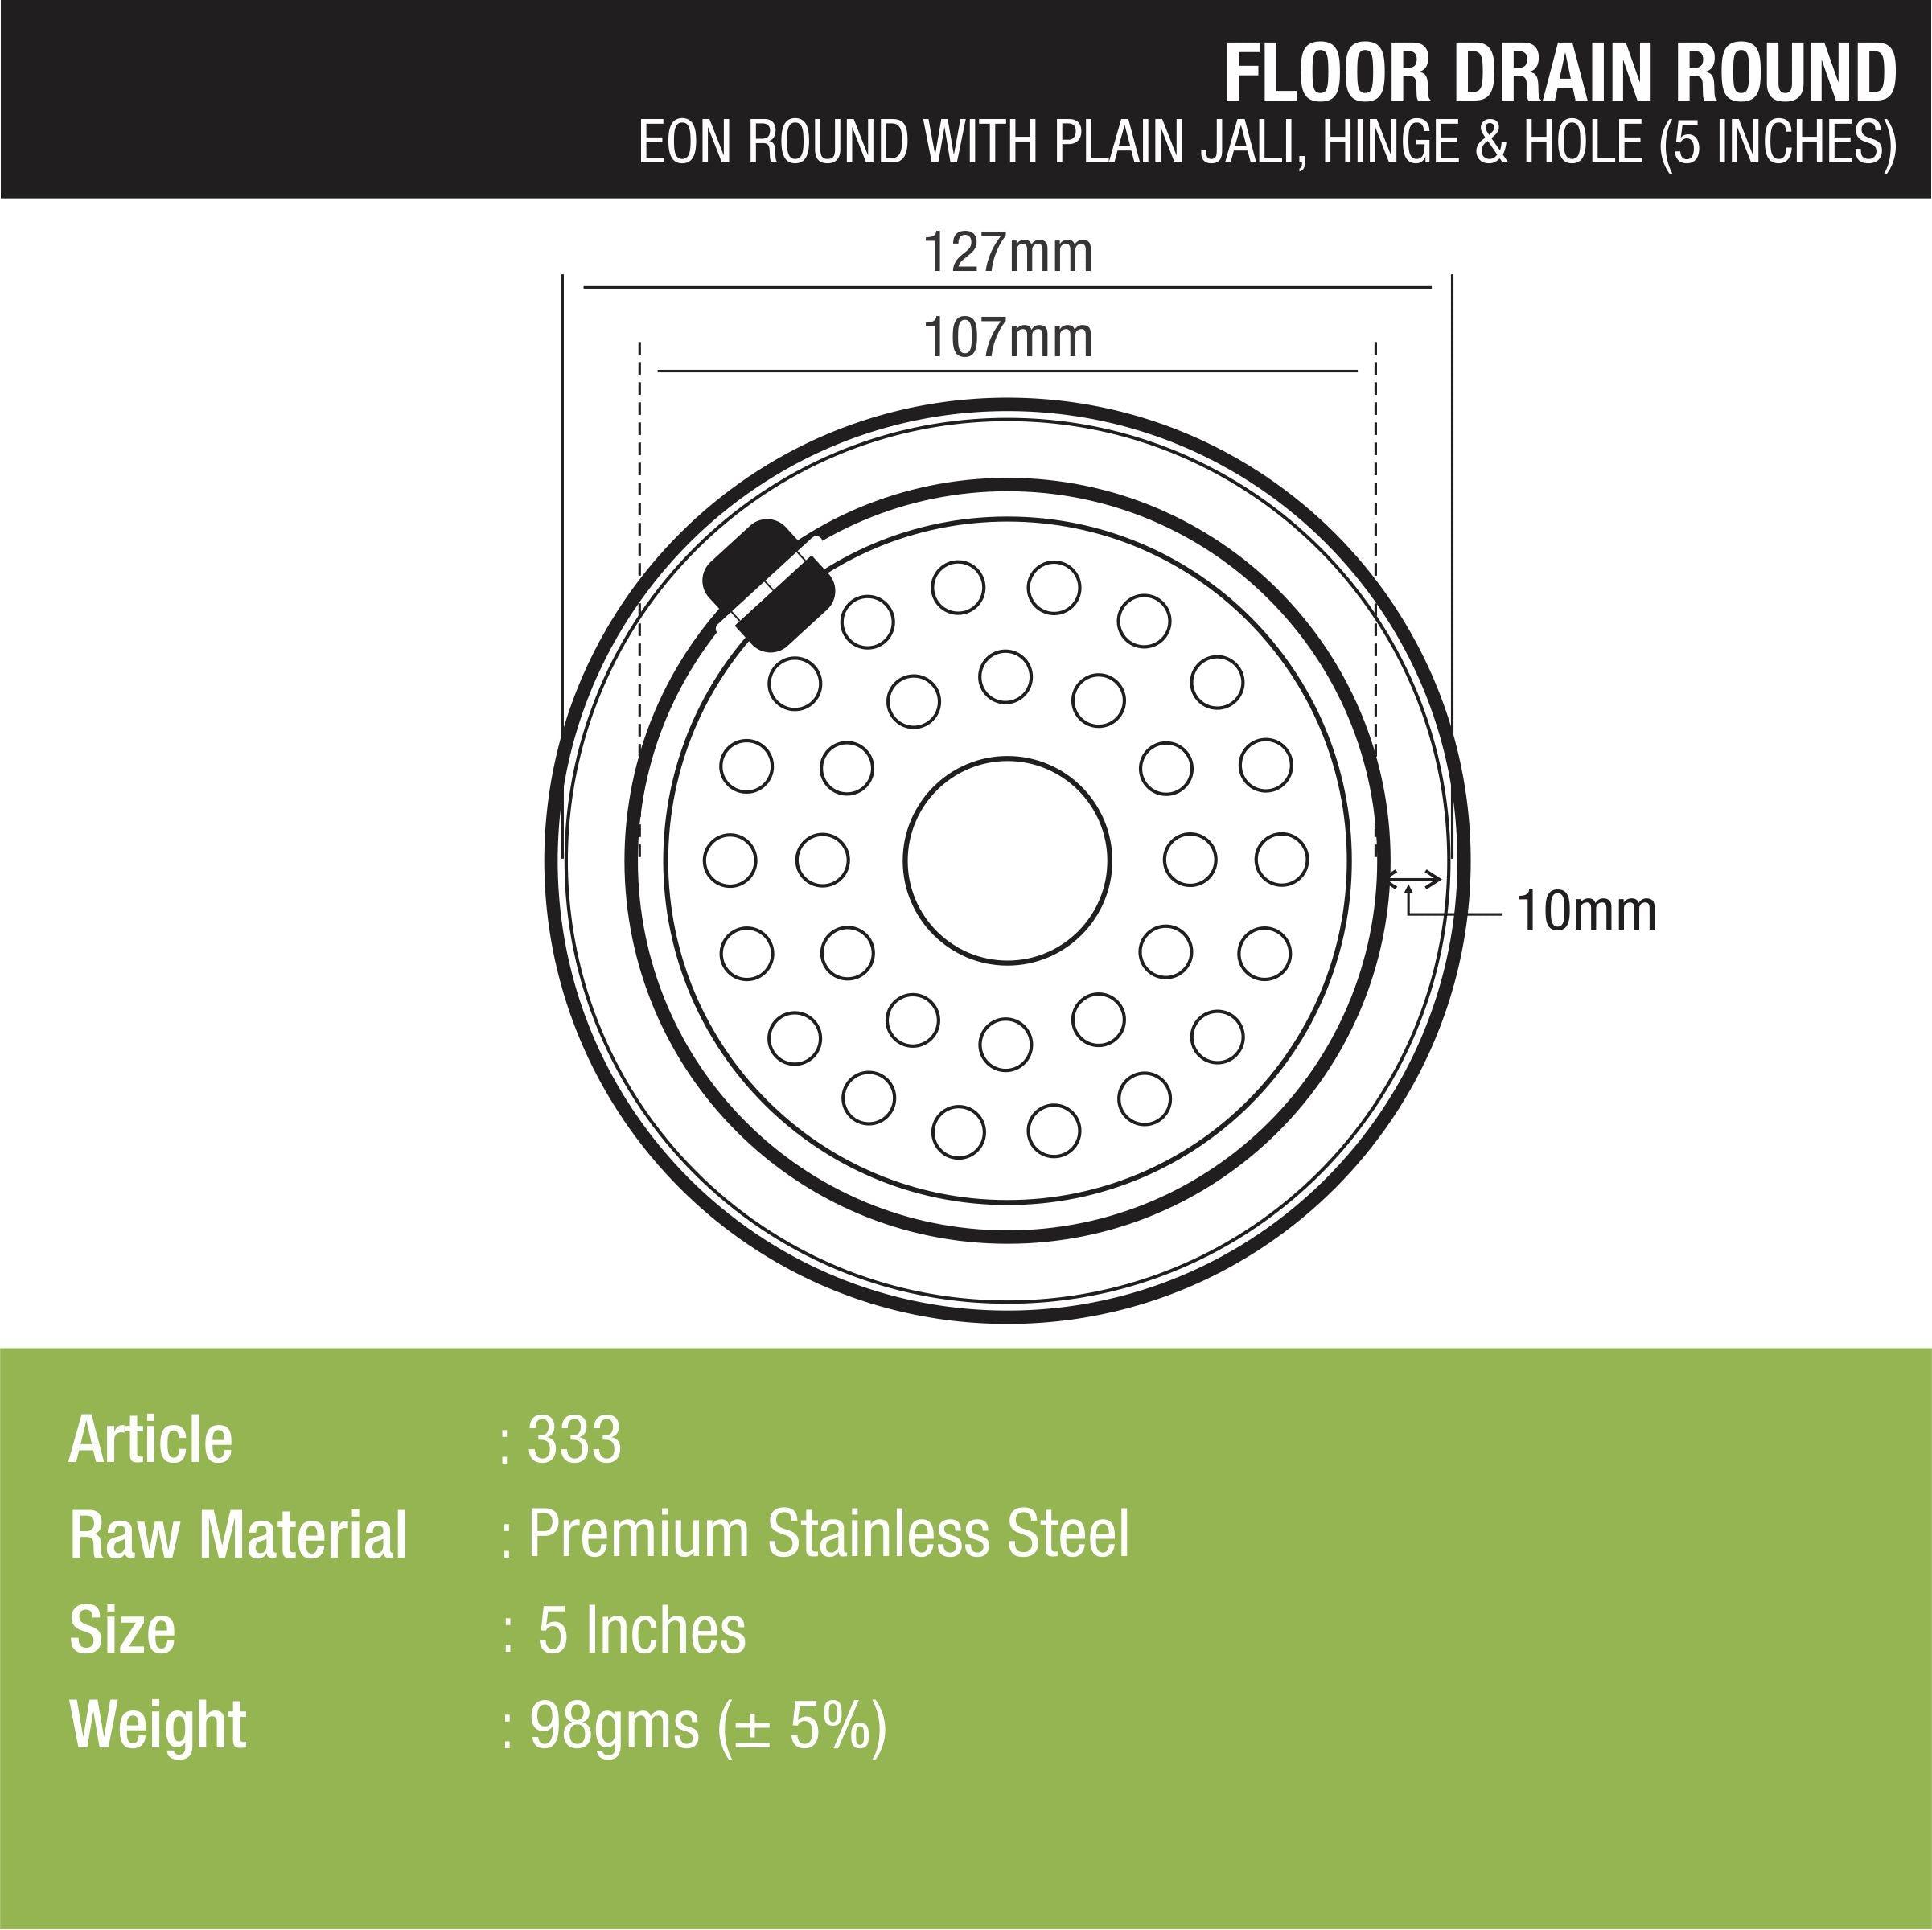 Eon Round Floor Drain with Plain Jali, Hinge & Hole (5 inches) dimensions and sizes